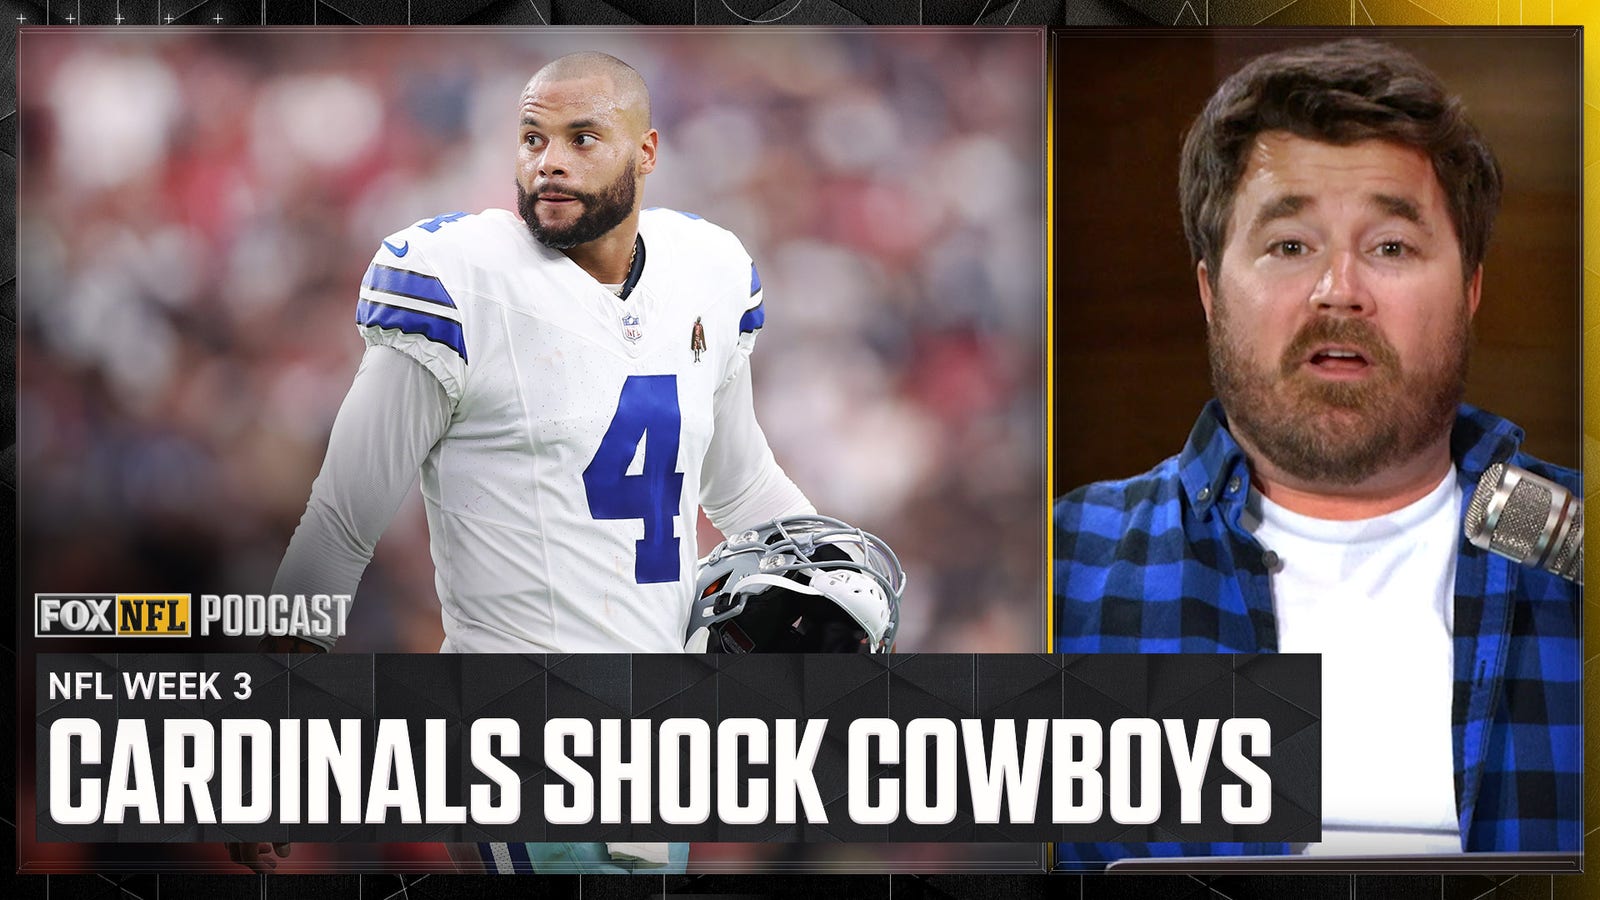 Dave Helman reacts to Cowboys' shocking loss to Cardinals 